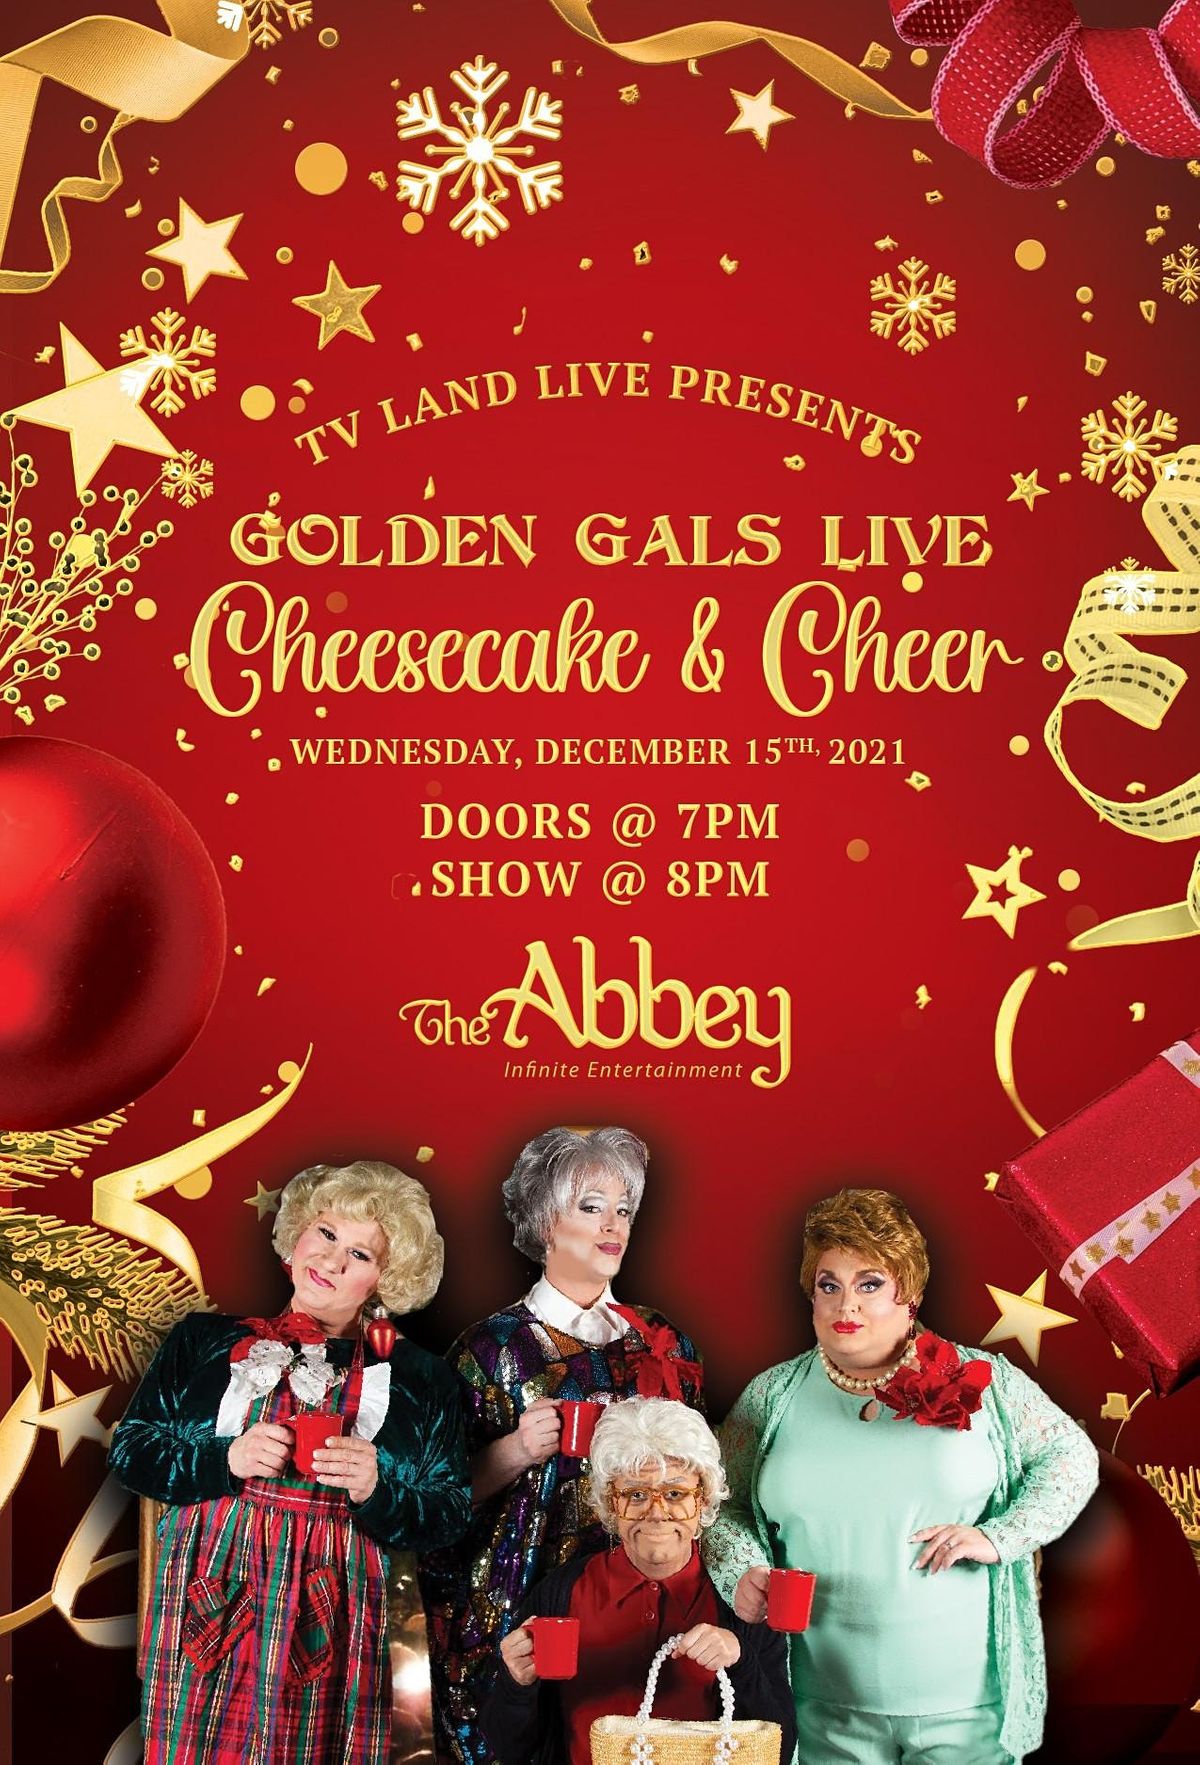 Golden Gals Live: Cheesecake and Cheer